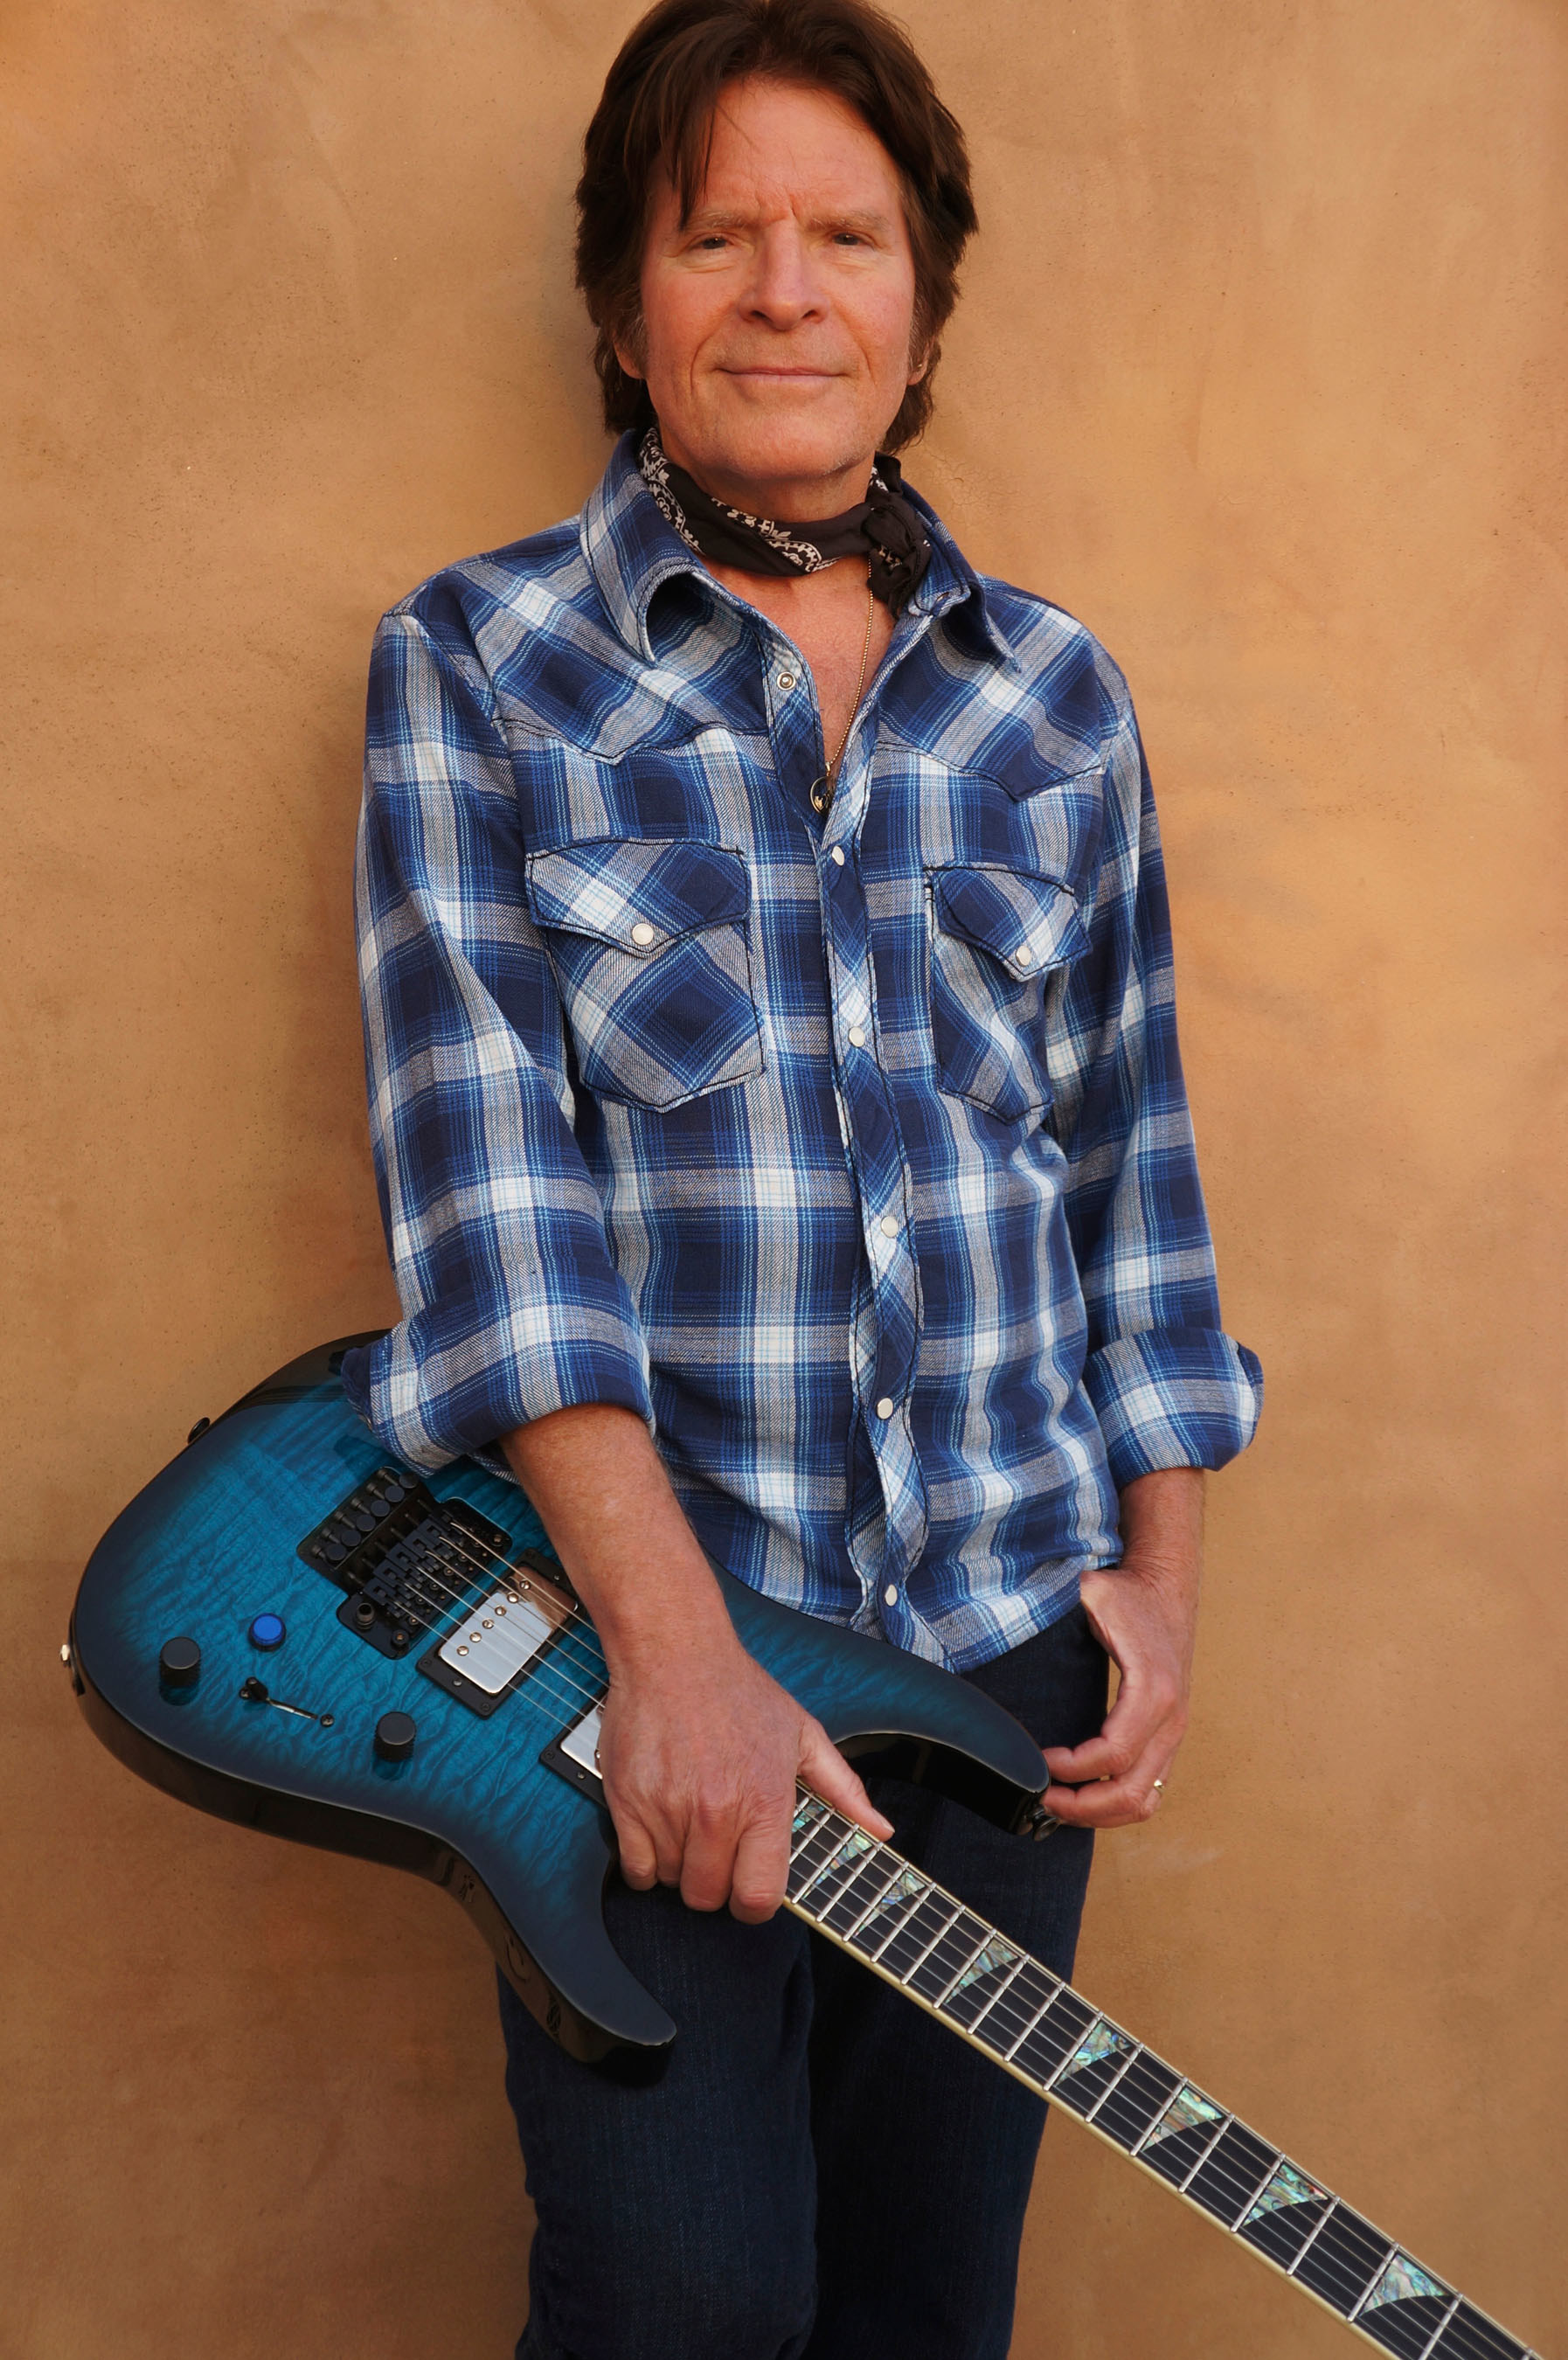 John Fogerty rocks the main stage at Gathering of the Vibes Friday, Aug 1, 2014 at 8:30 pm. (PRNewsFoto/Gathering of the Vibes)